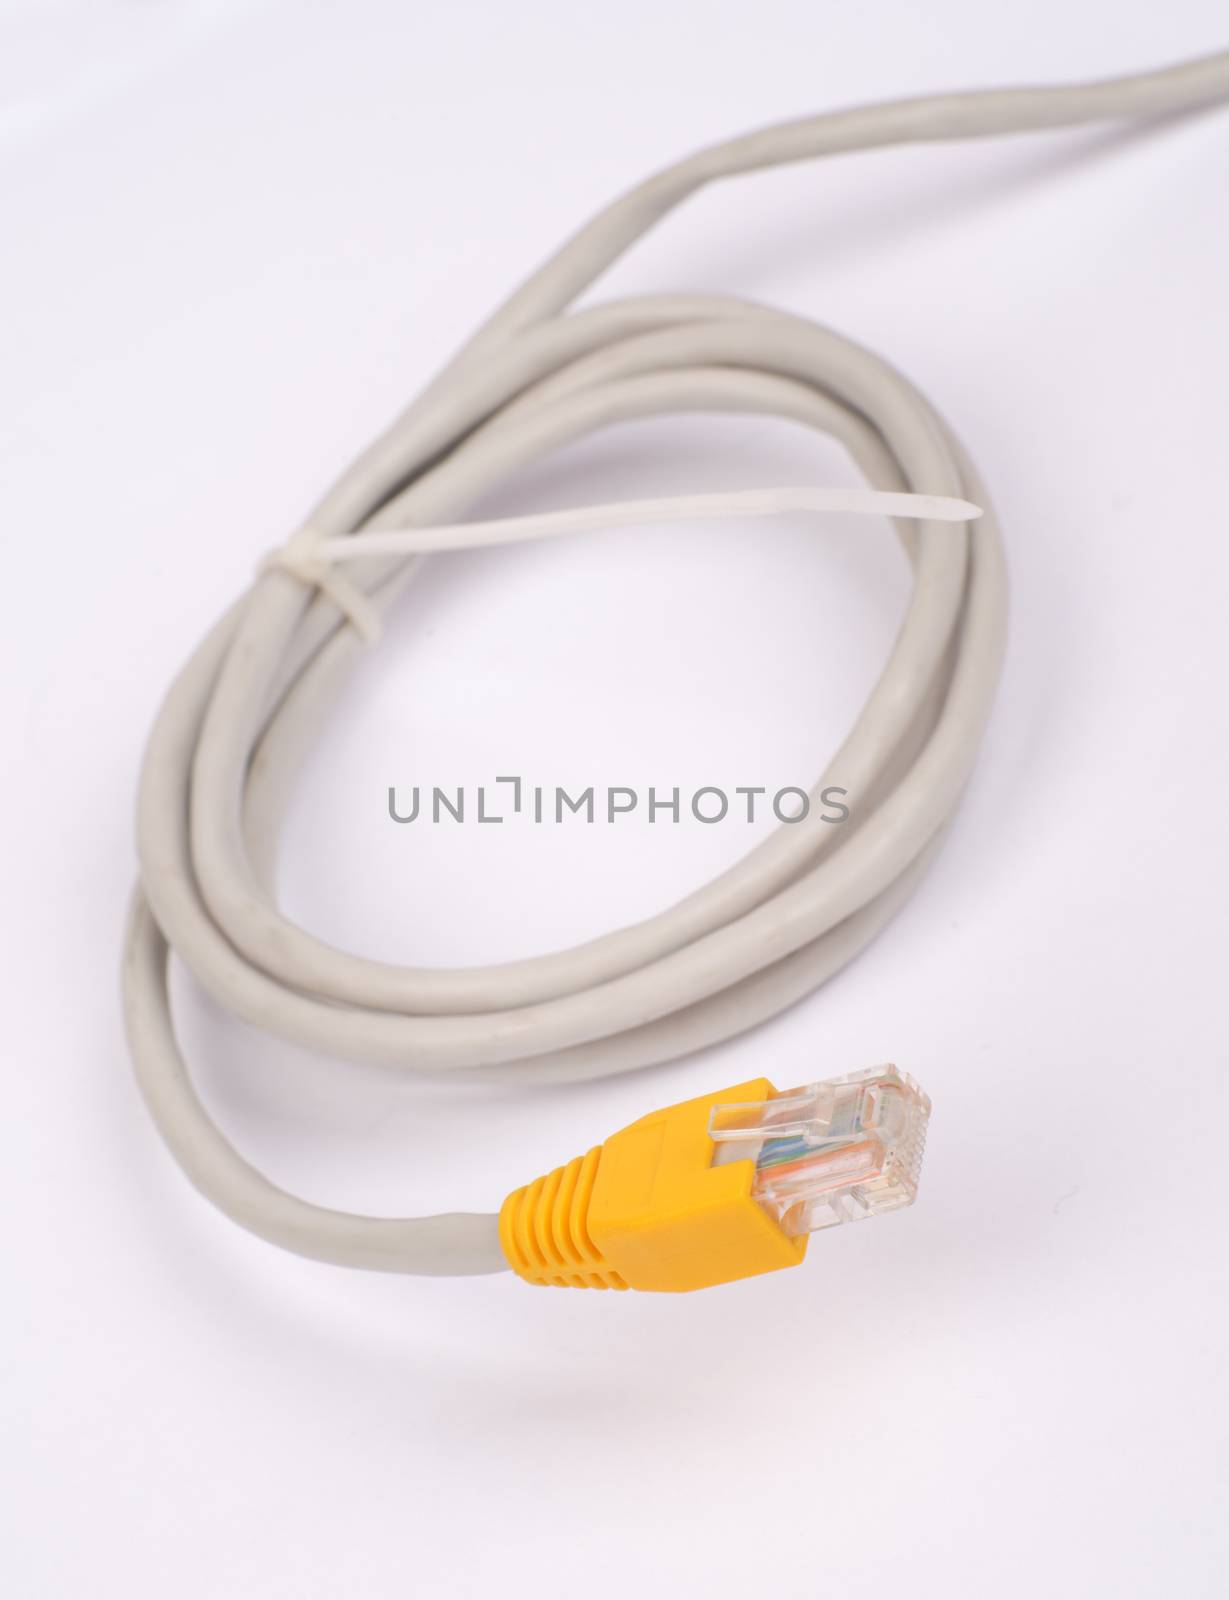 Twisted yellow computer cable on isolated white background, close up view